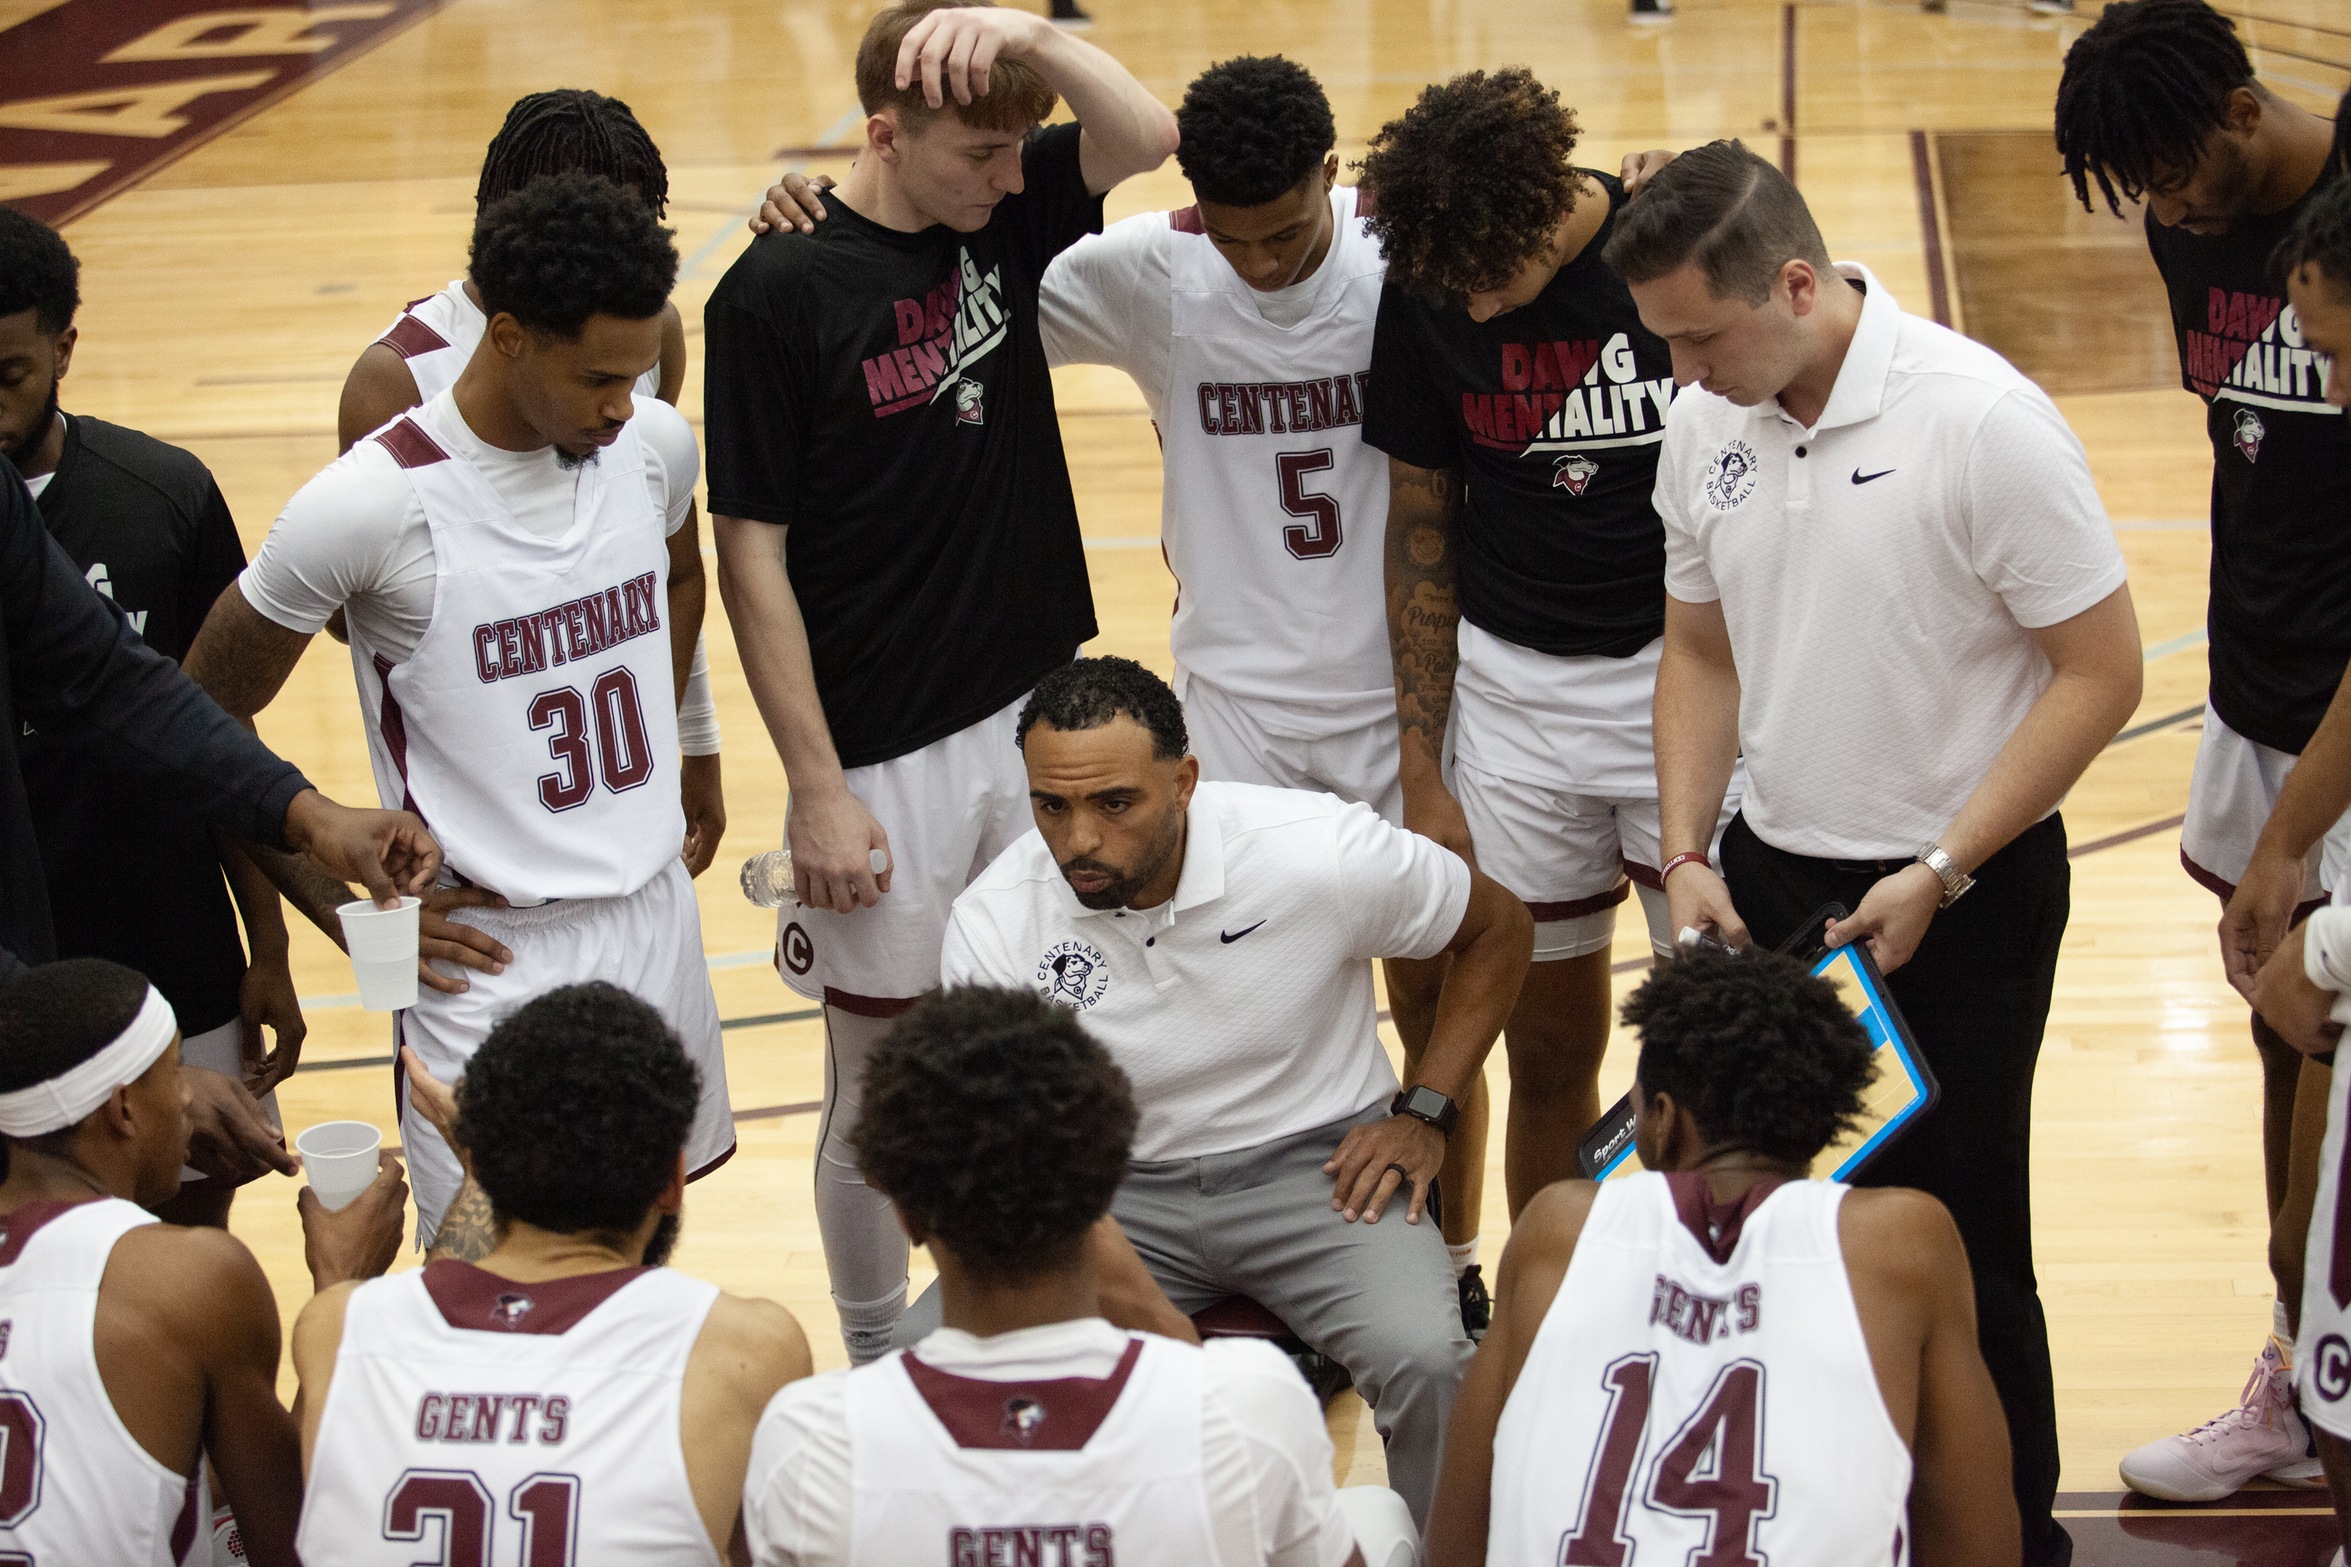 The Gents will welcome Trinity and Schreiner to the Gold Dome this weekend to begin SCAC play.